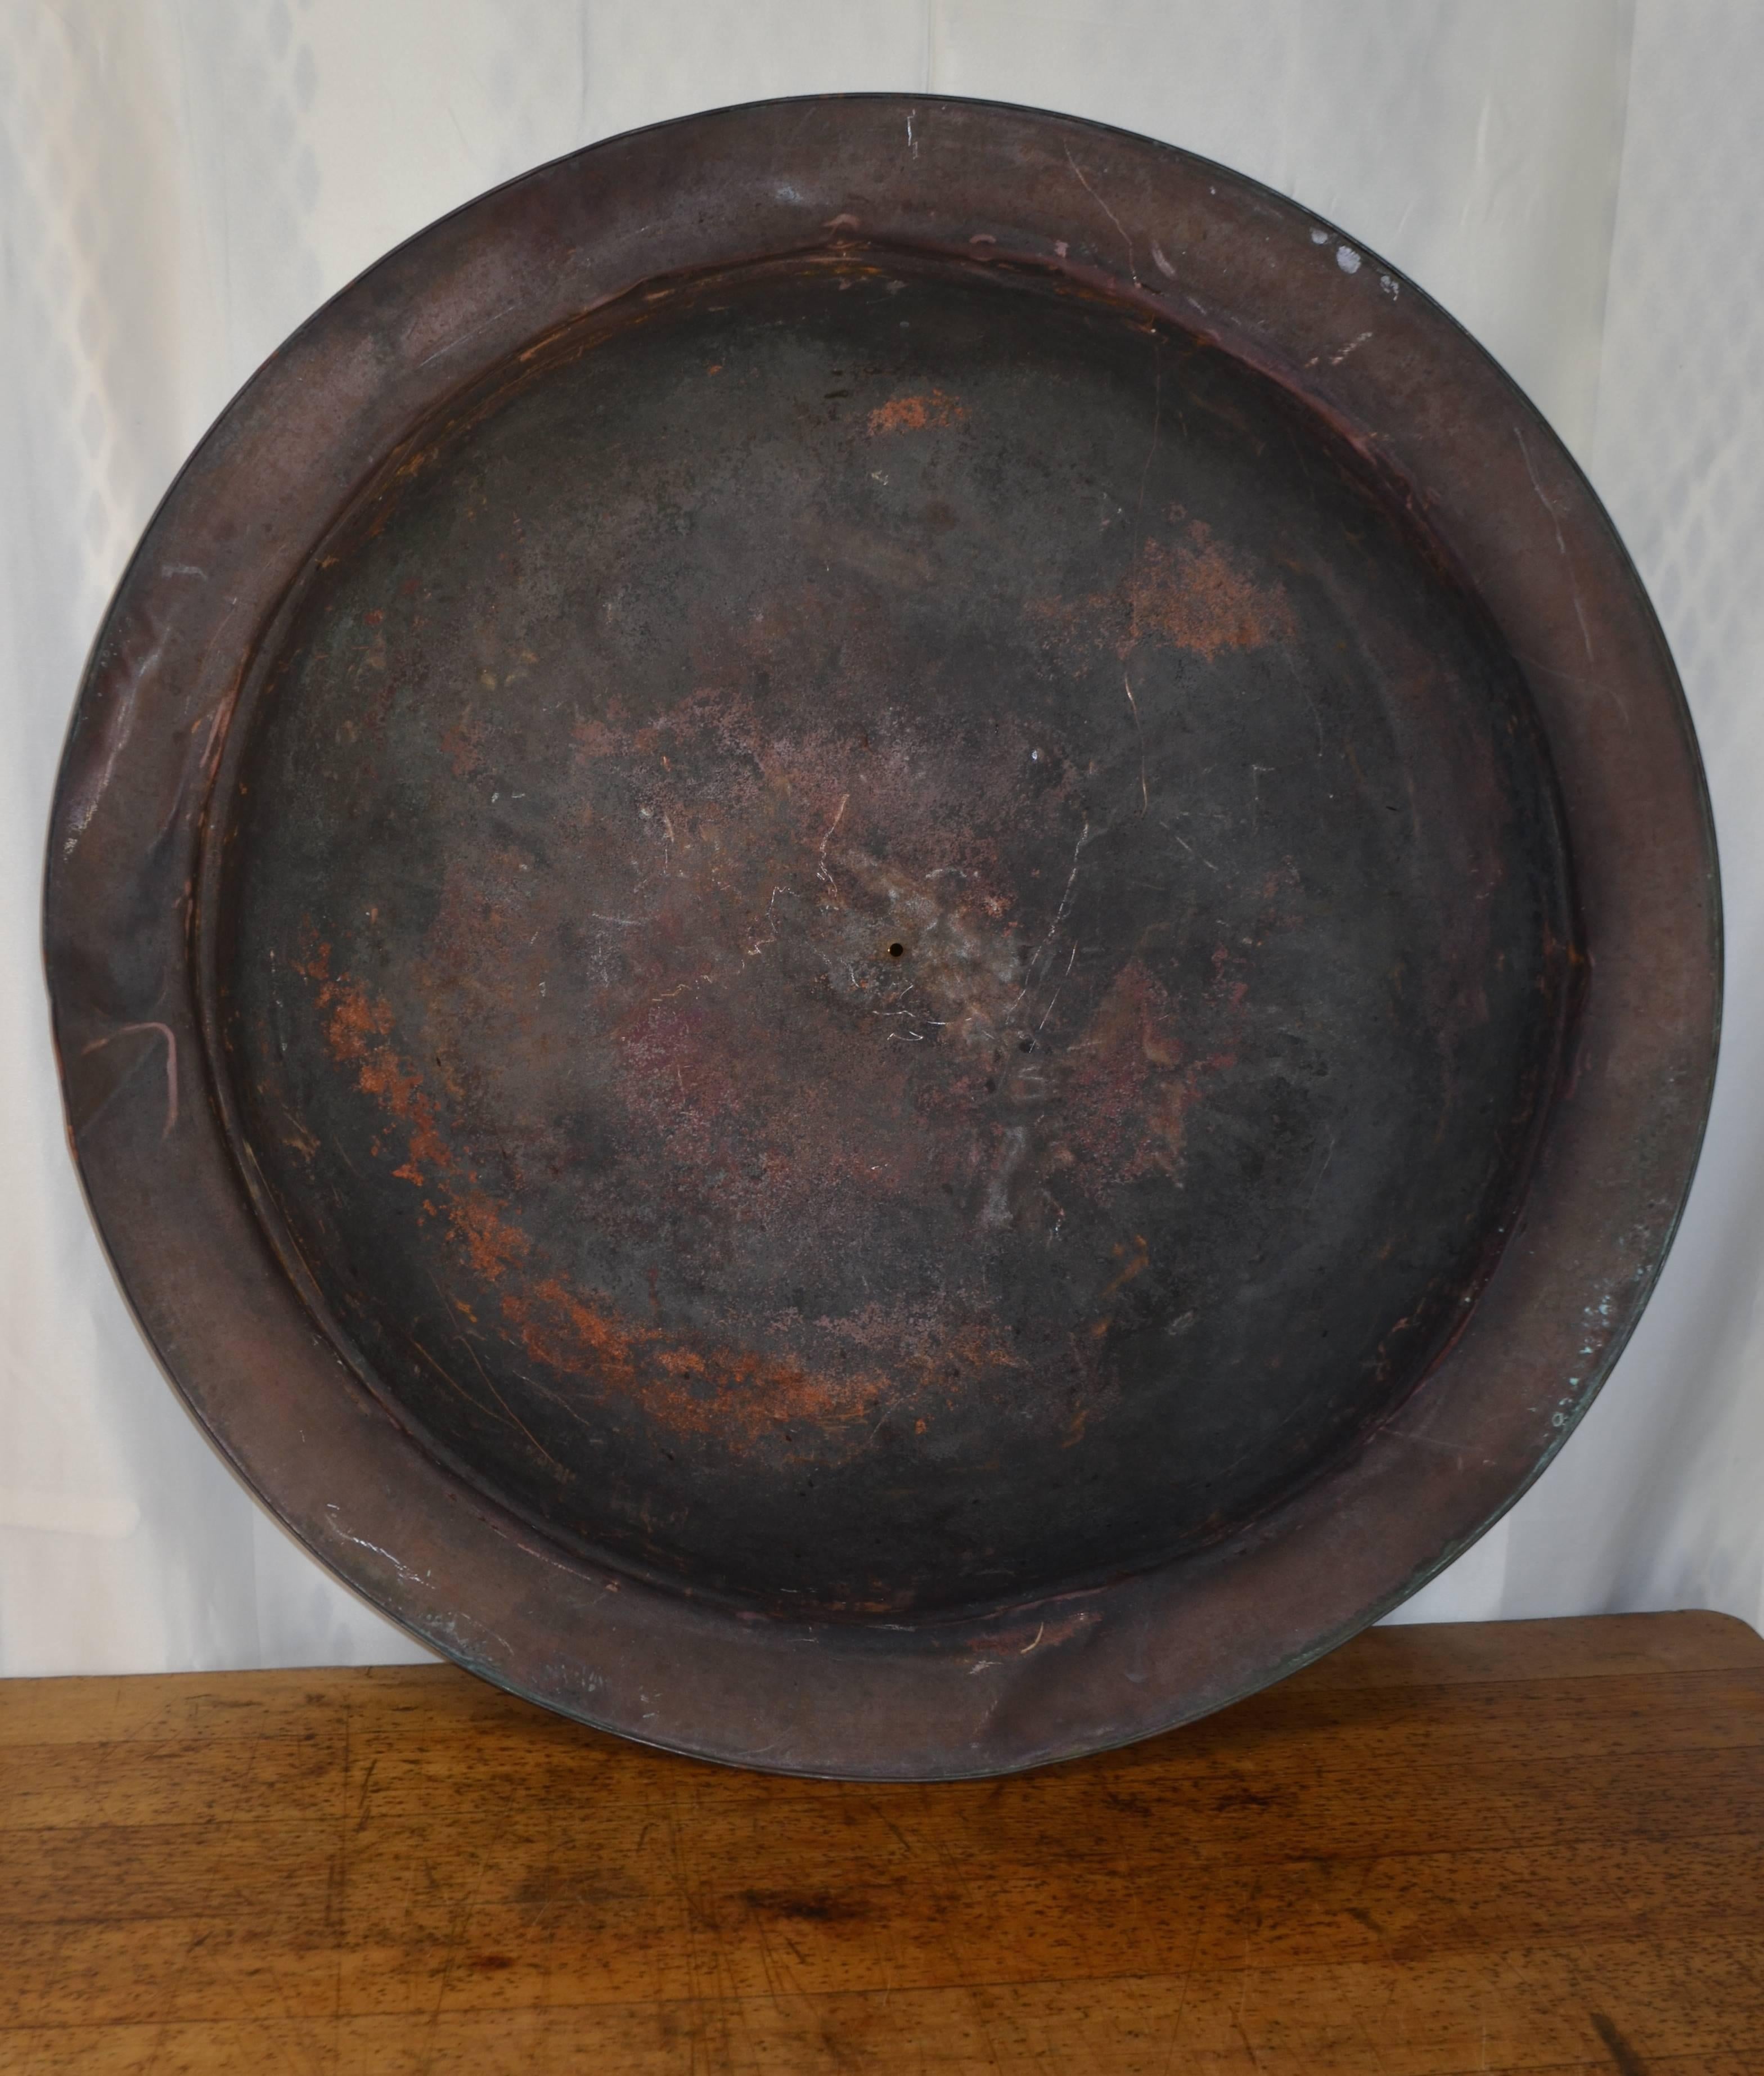 Copper disc makes compelling wall art. Mounts concave or convex. Concave side pictured above has been sealed with lacquer and displays a wrinkled, richly dark chocolate patina. Tactile yet smooth. Very intriguing to touch and to behold. One of those